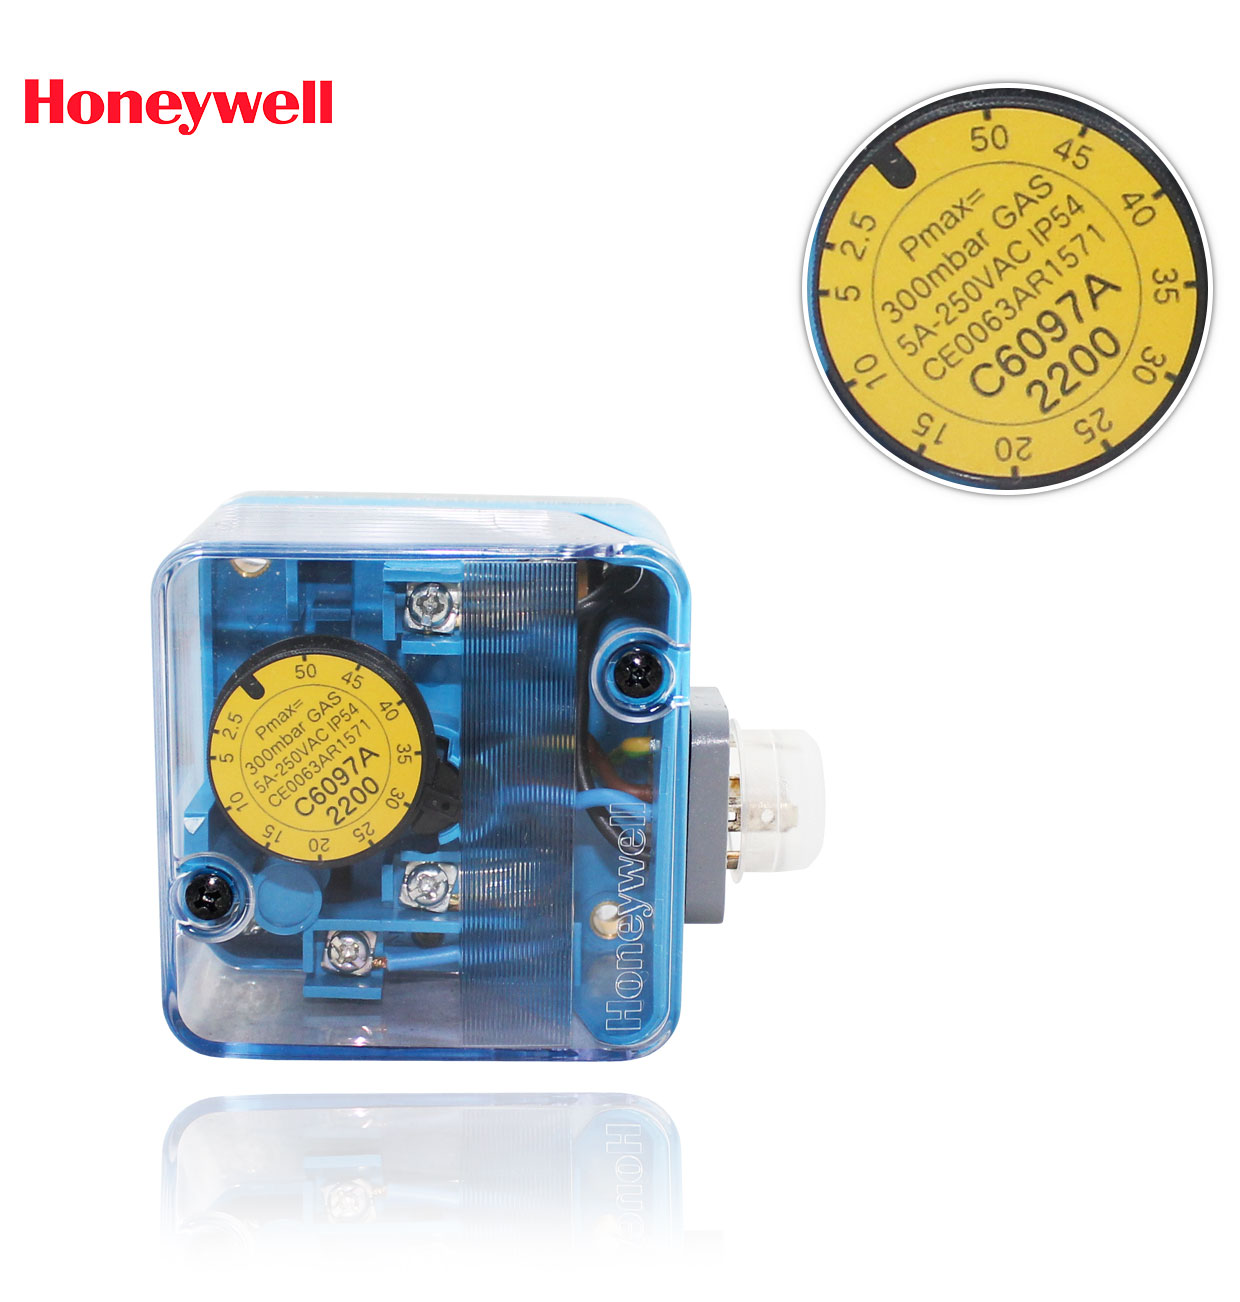 C 6097 A 2200  2.5-50mbar. HONEYWELL DIFFERENTIAL PRESSURE SWITCH